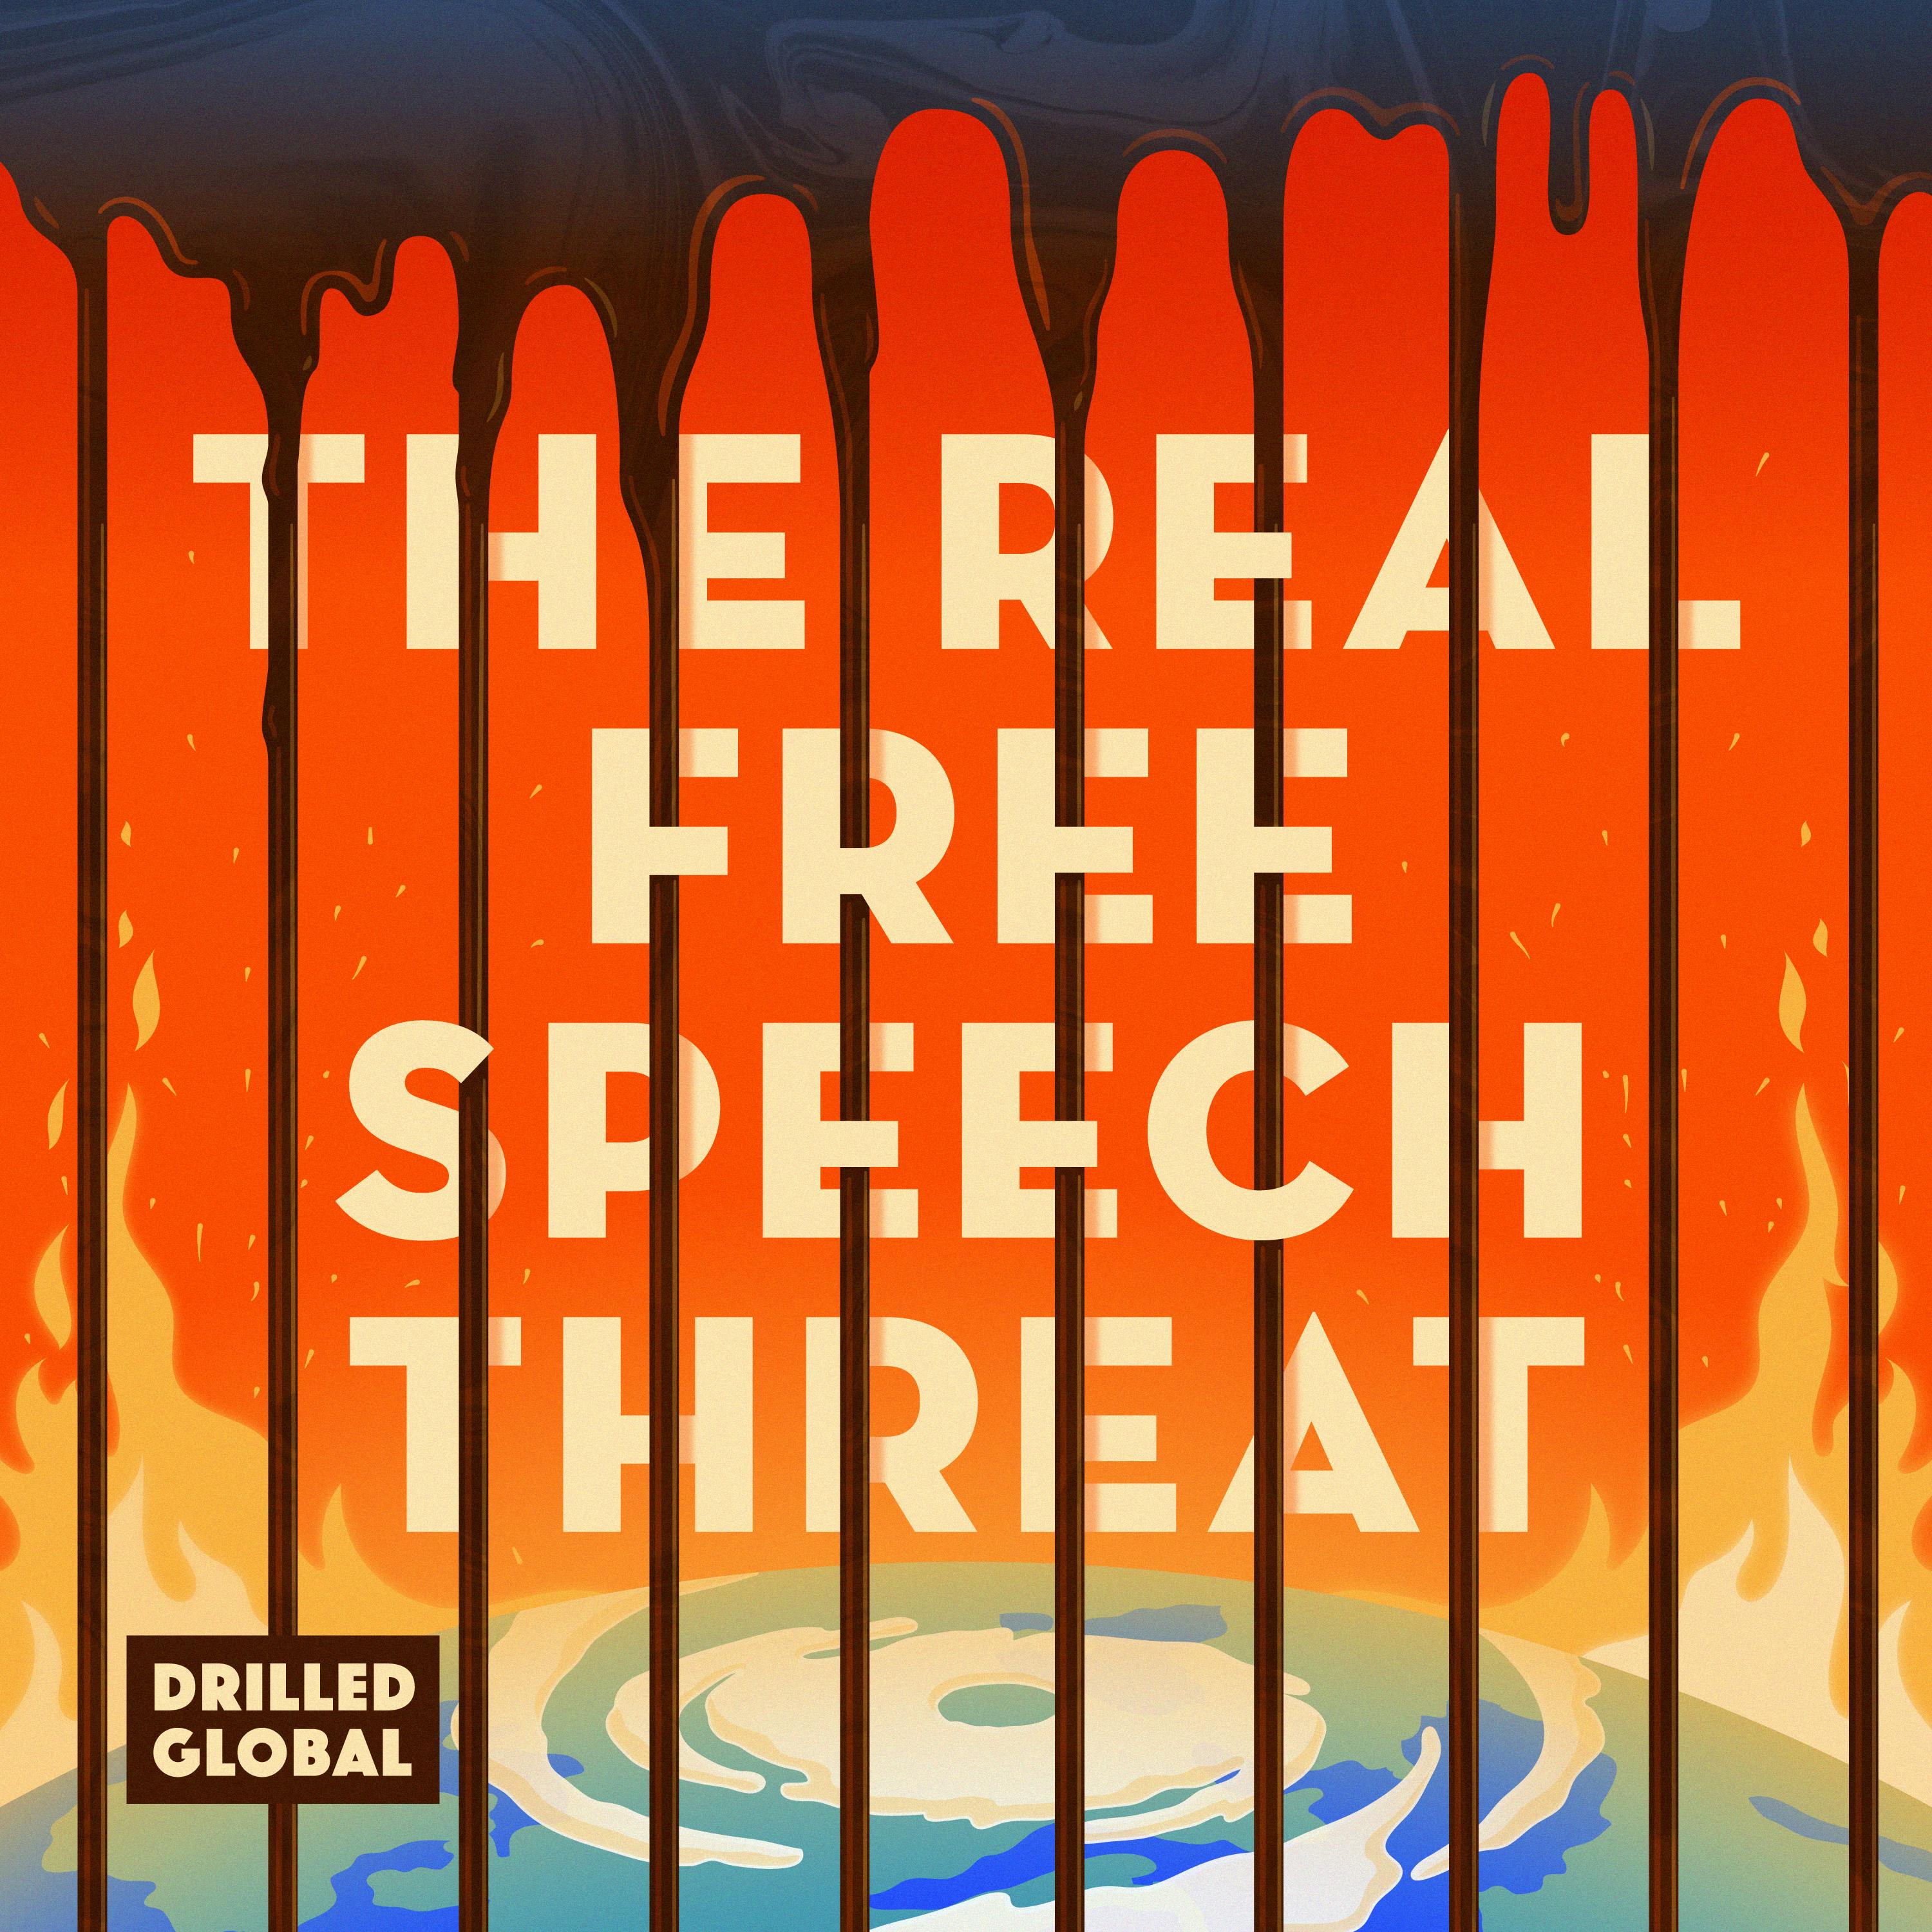 The Real Free Speech Threat: Meet the Shadowy Global Network Vilifying Climate Protestors